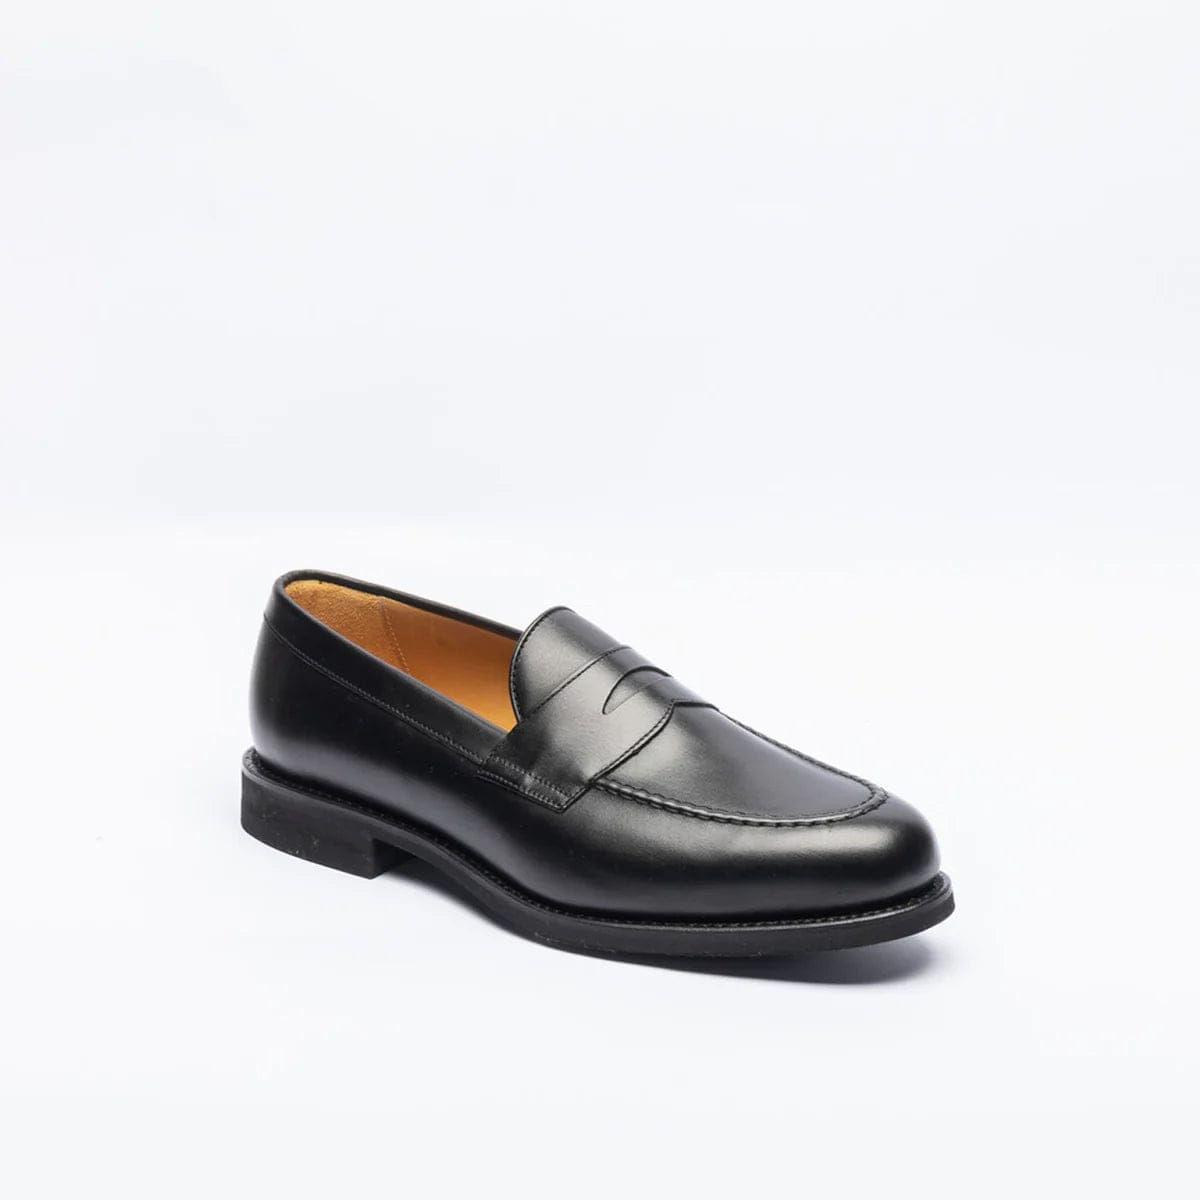 1707 9628 Loafer Black Calf With Rubber Sole